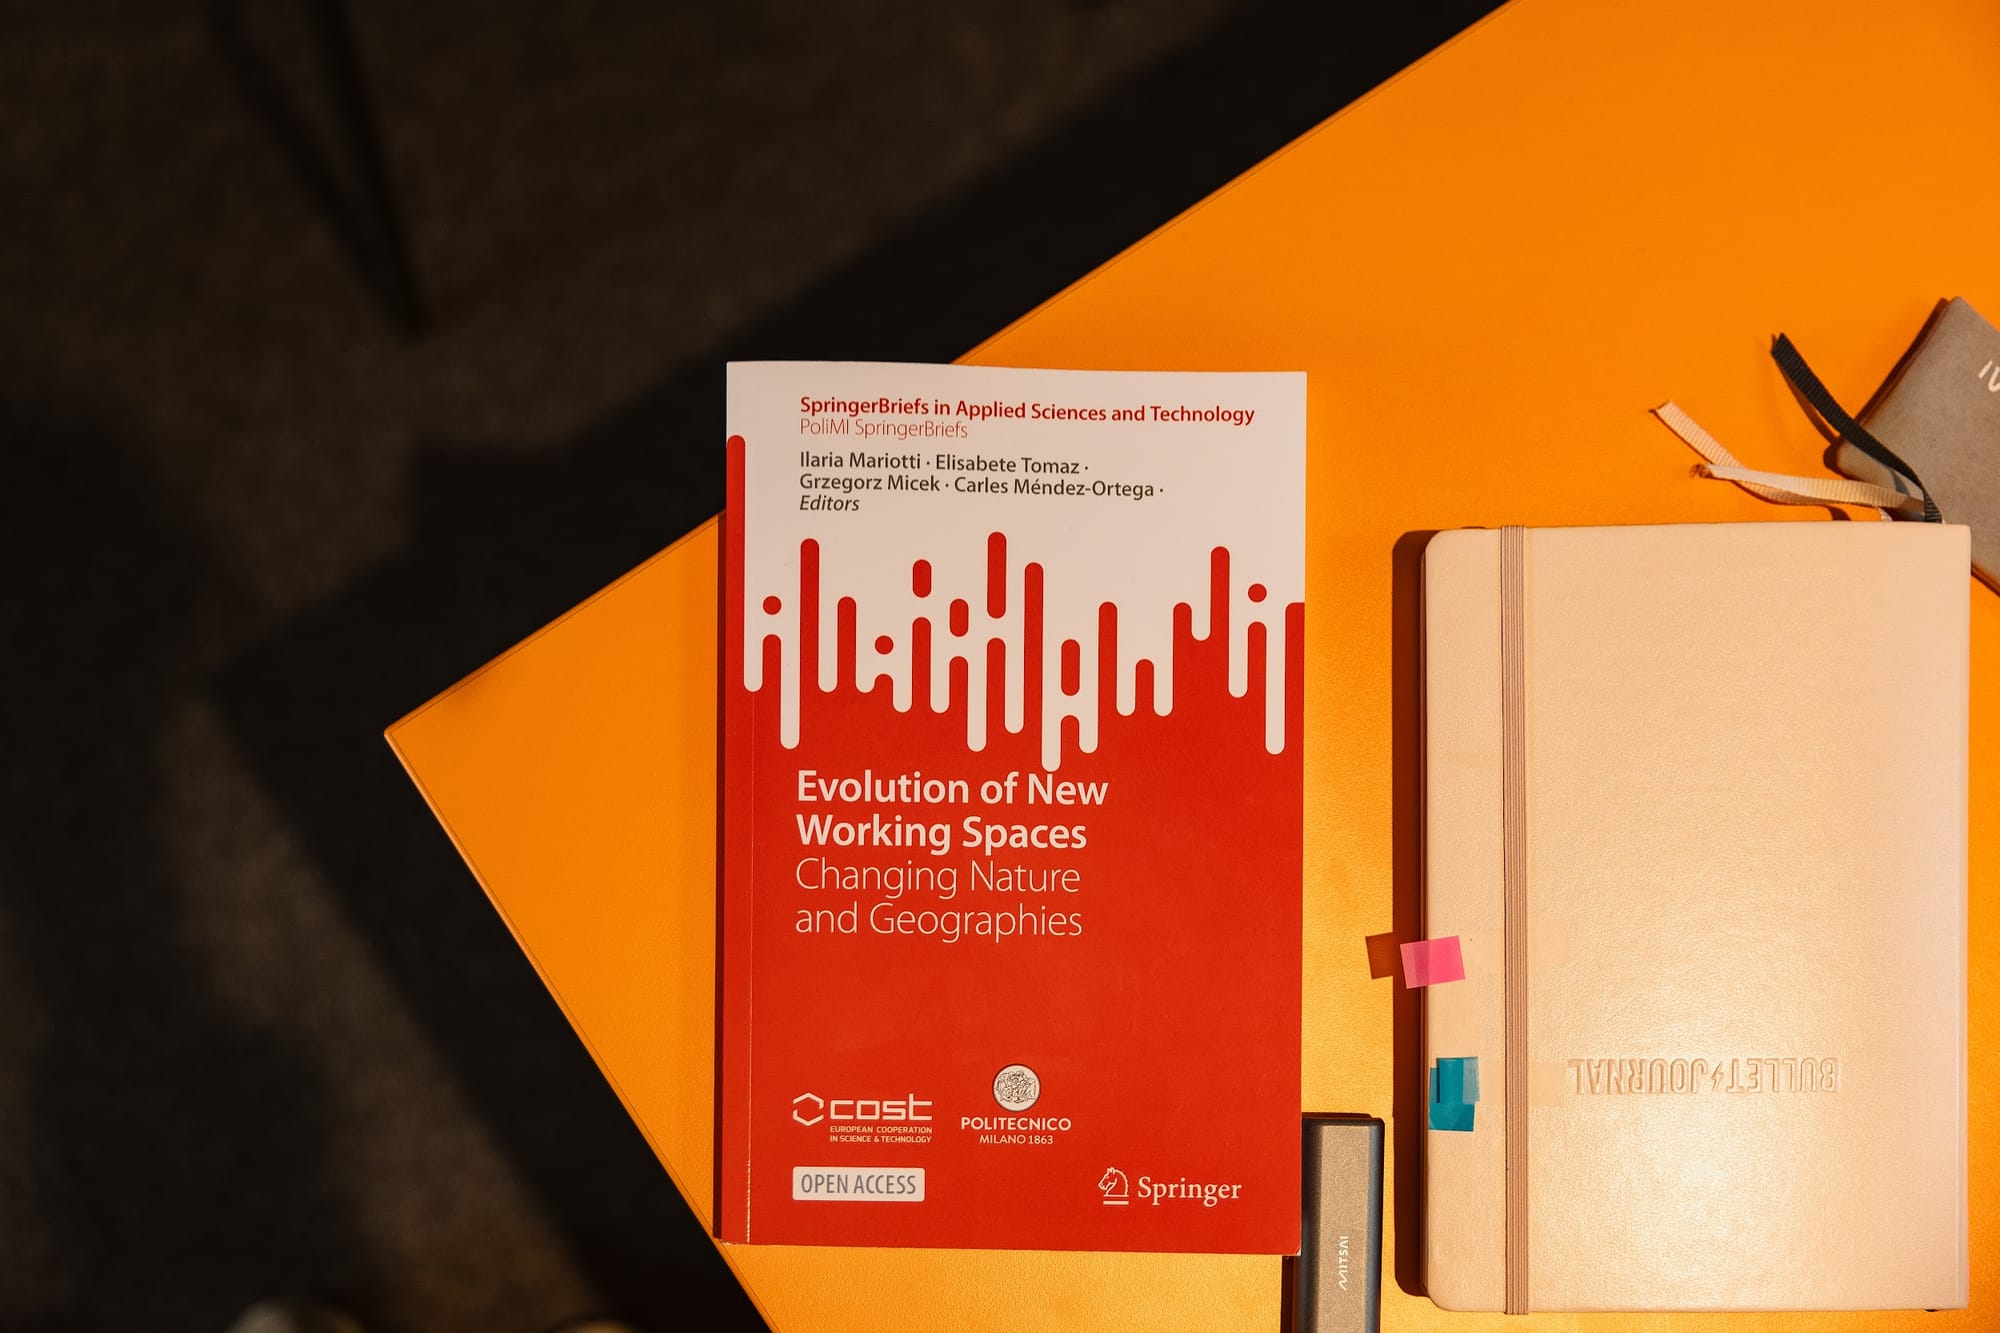 Evolution of New Working Spaces" book cover placed on a wooden table, featuring a modern office setting